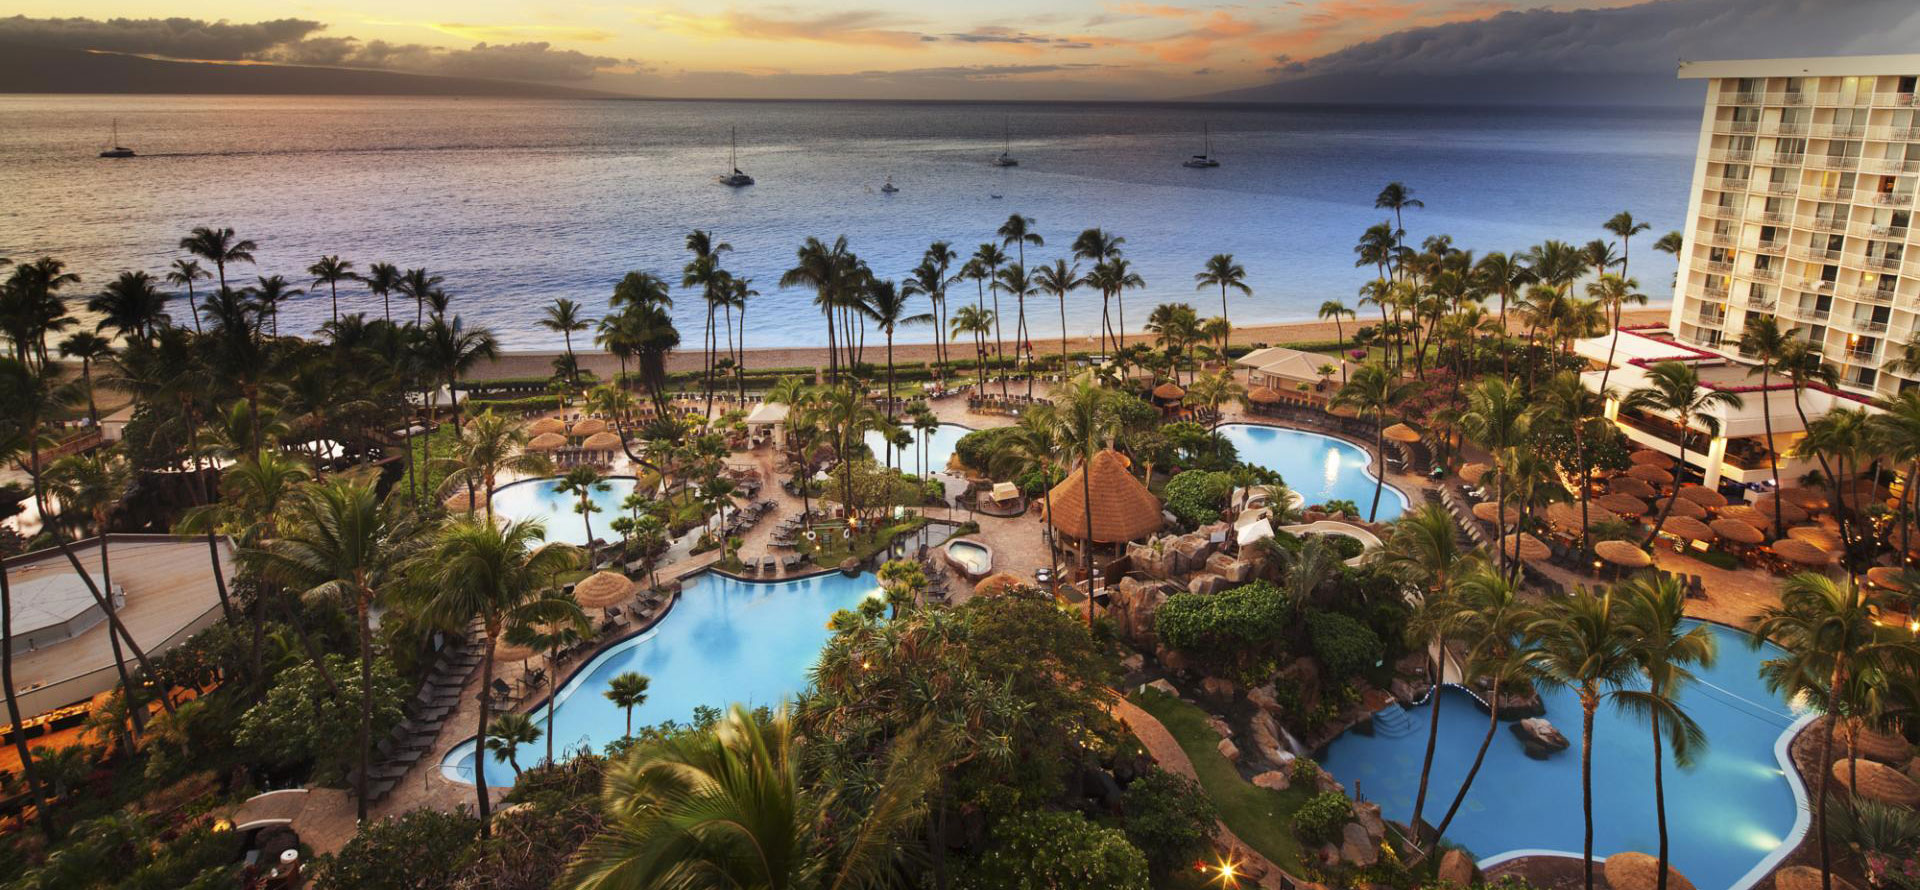 Sunset in Maui All-Inclusive Family Resorts.